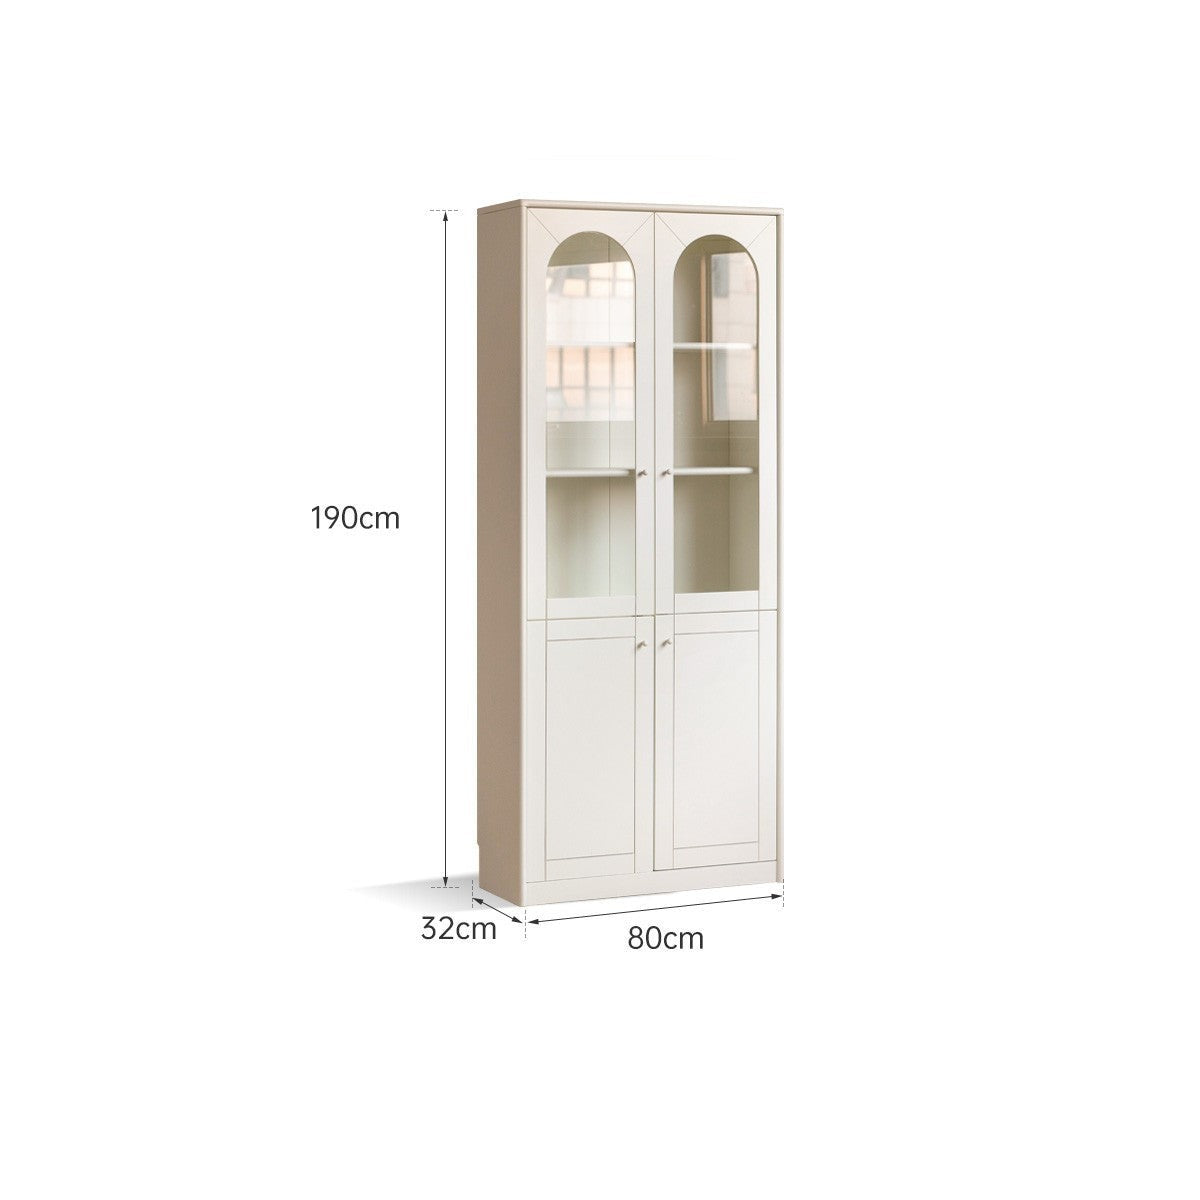 Poplar, birch solid wood bookcase white with glass door whole wall combination French cream style